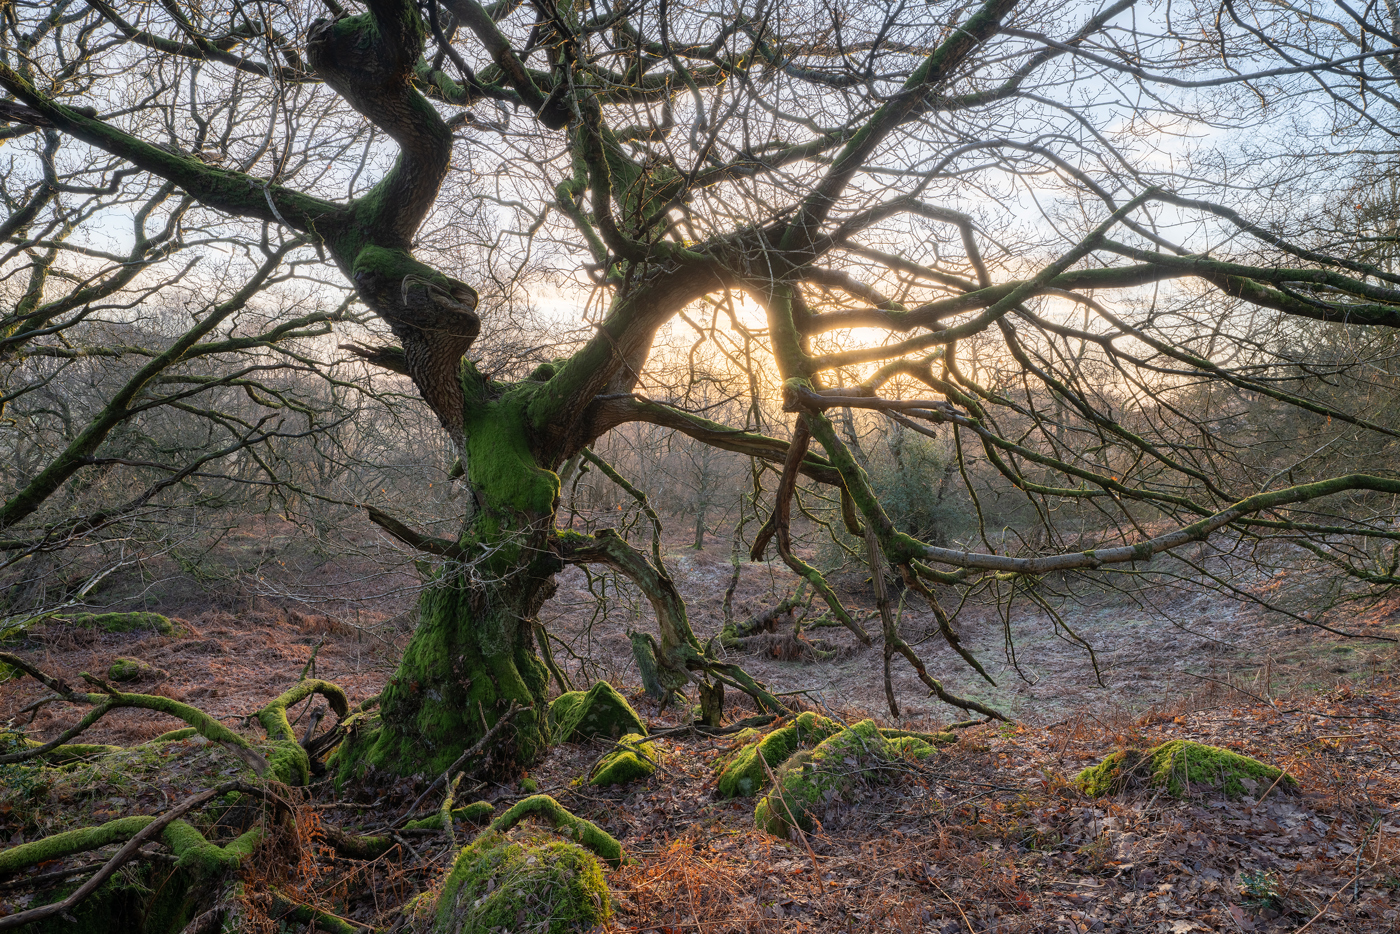 An ancient, gnarled tree stands at the heart of an ancient woodland. Its moss-covered branches twist and stretch towards a soft sunrise peeking through the dense tangle of bare limbs. The forest floor is blanketed with fallen leaves and sporadic tufts of grass.